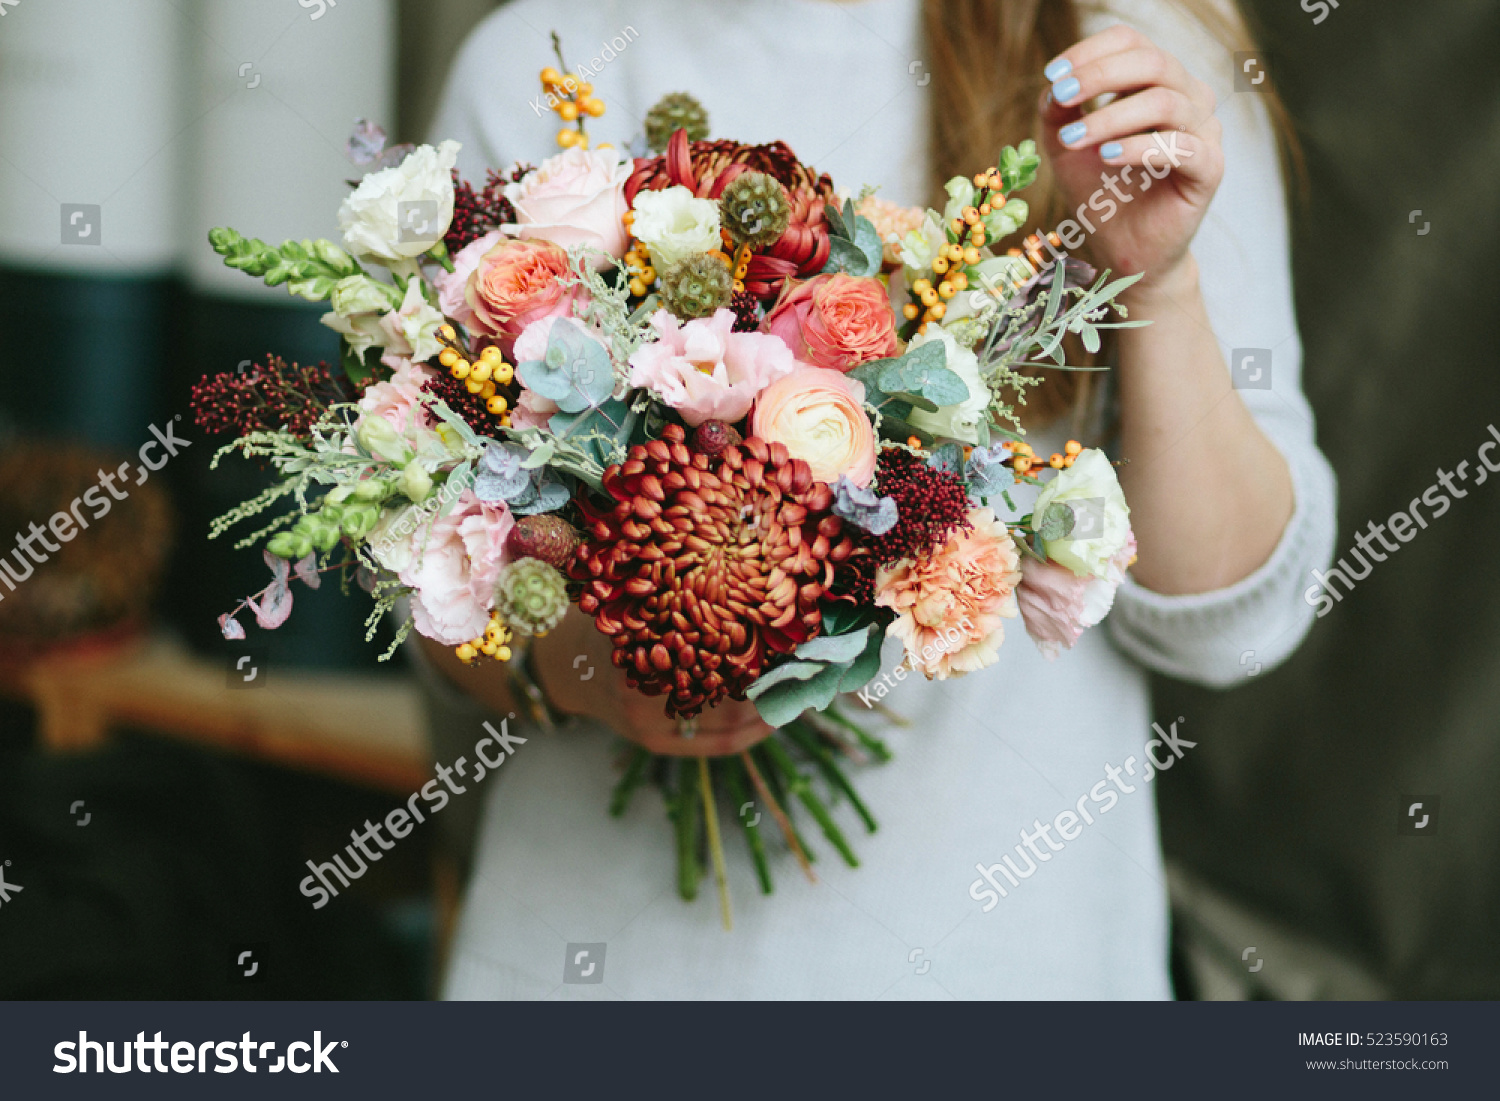 Florist shop in daylight. Woman holding beautiful bouquet of flowers. Florist with her work. Stylized tender photo with hipster filter.  #523590163